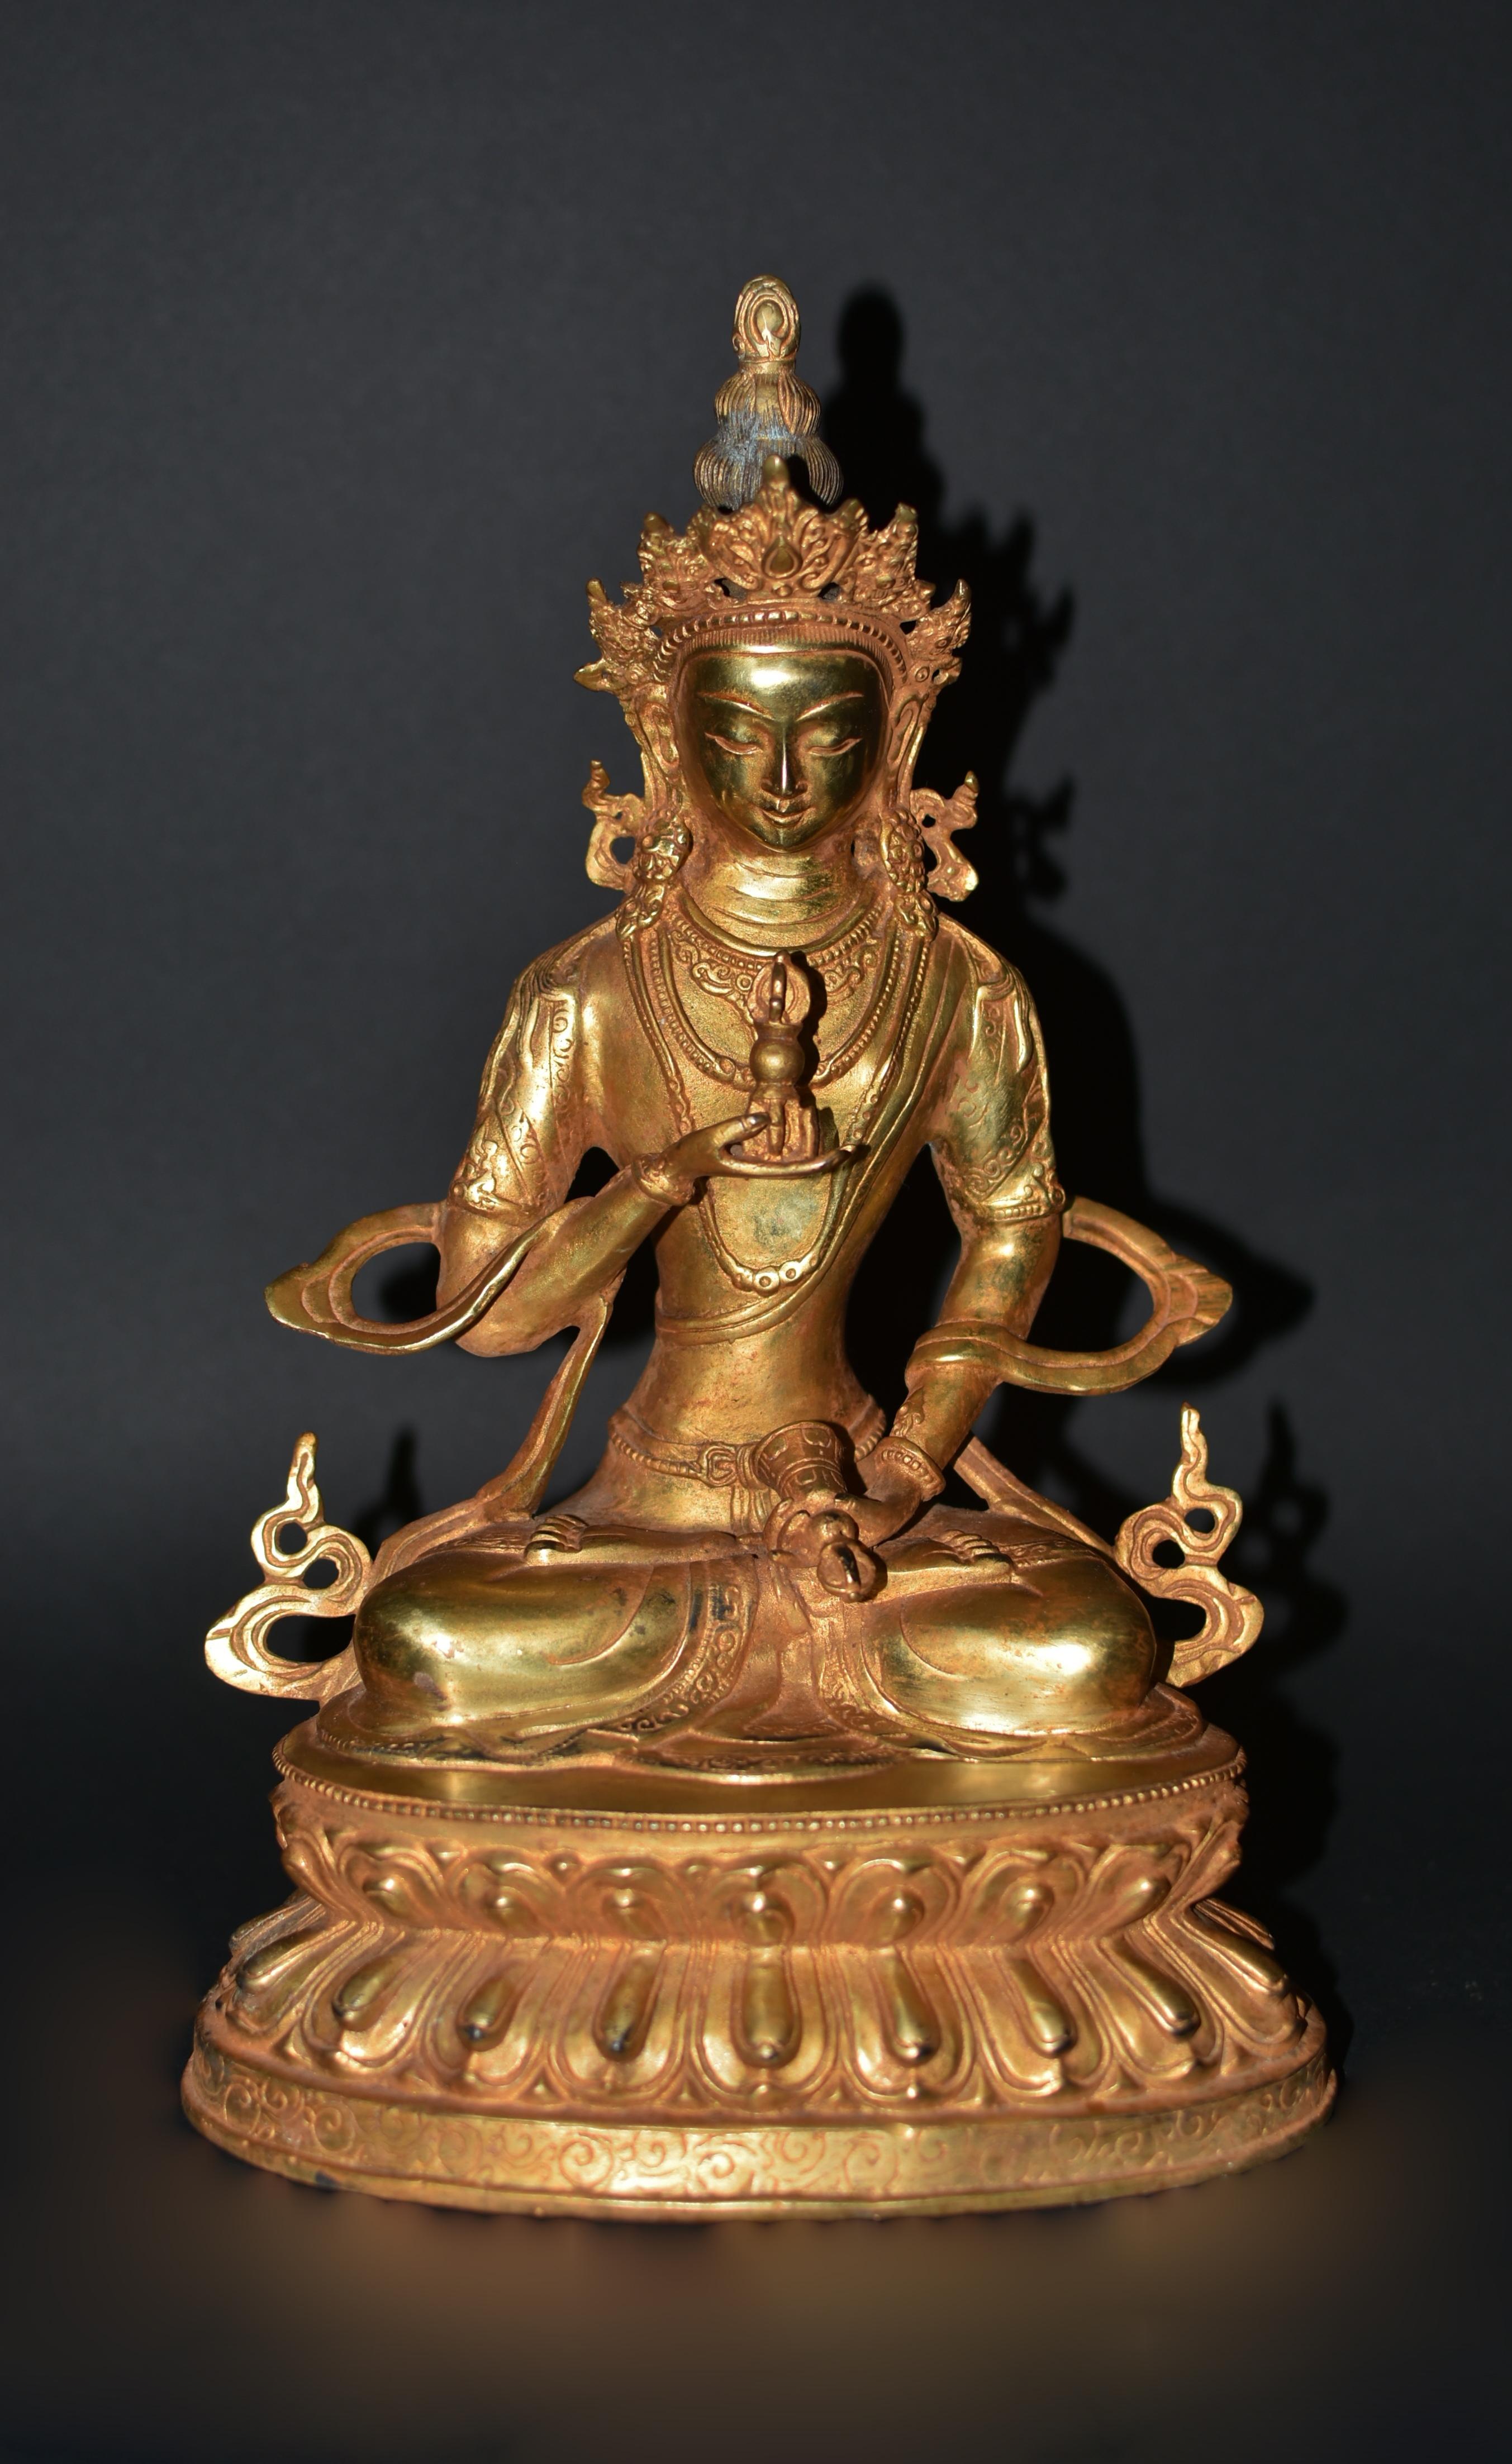 A beautiful, 7 lb, gilt bronze Tibetan sculpture of Buddha Vajrasatwa. Seated dhyana asana on double lotus throne, left hand holding a ghanta bell, right hand holding vajra thunderbolt, scepters of combined male and female energy to conquer evil.